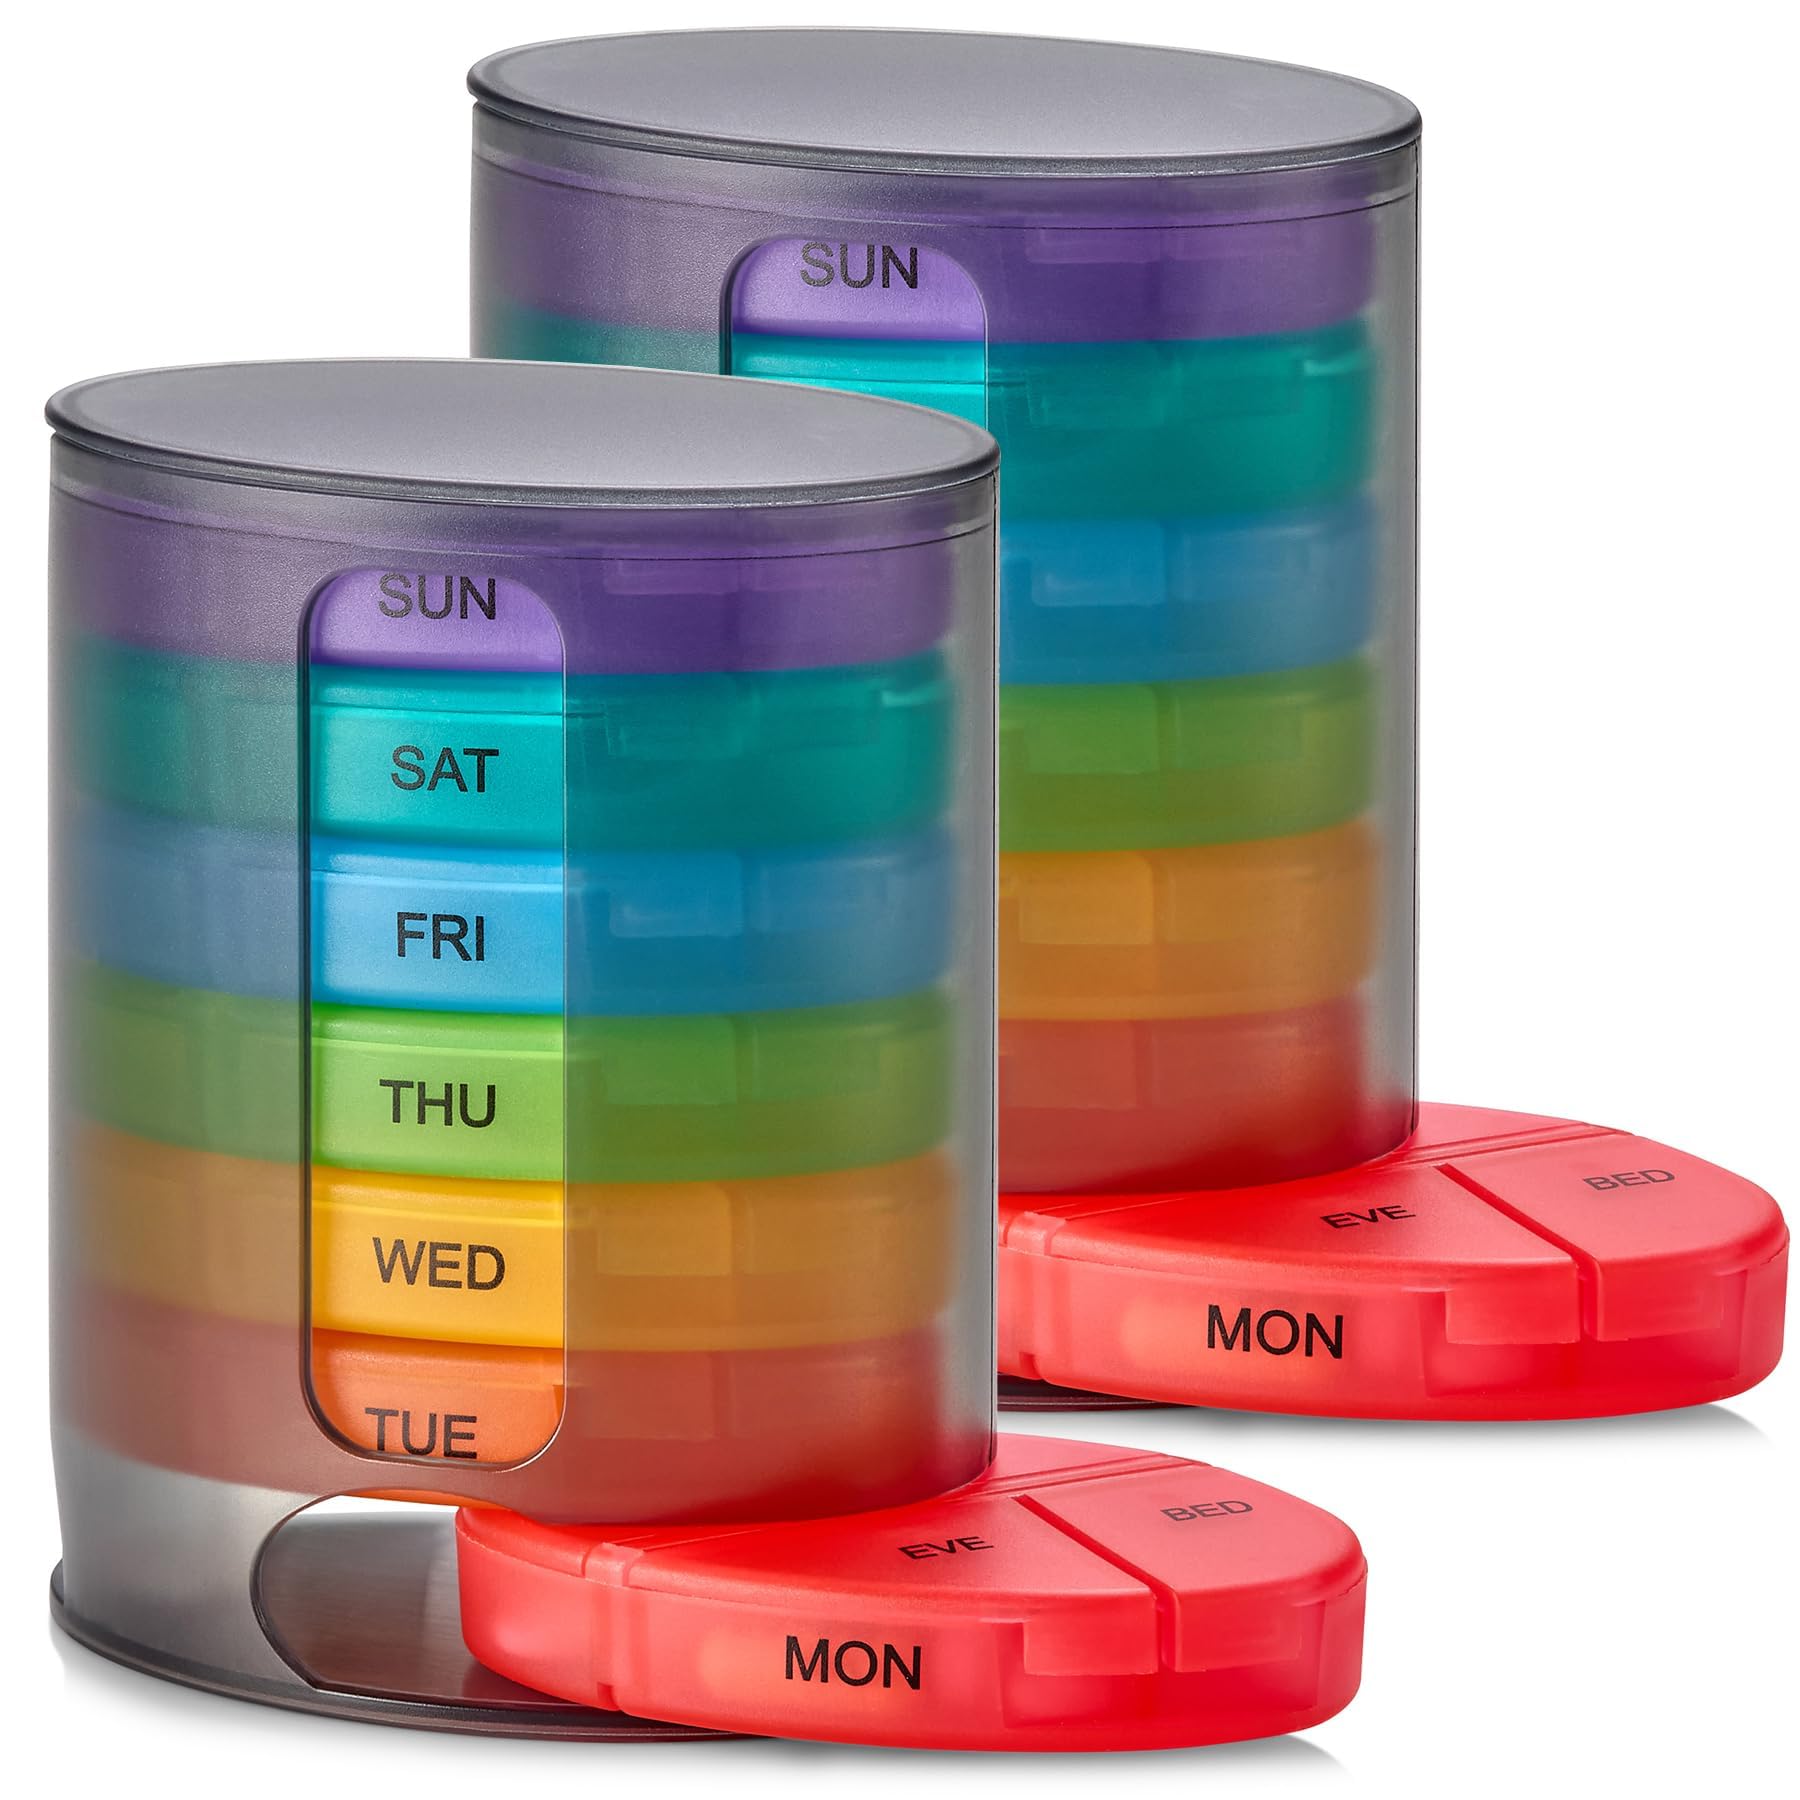 MEDca Pill Organizers - (2 Pack) Large Pill Organizer with Weekly and Daily  4-Times-A-Day Compartments for Morning, Noon, Evening, Night - BPA-Free